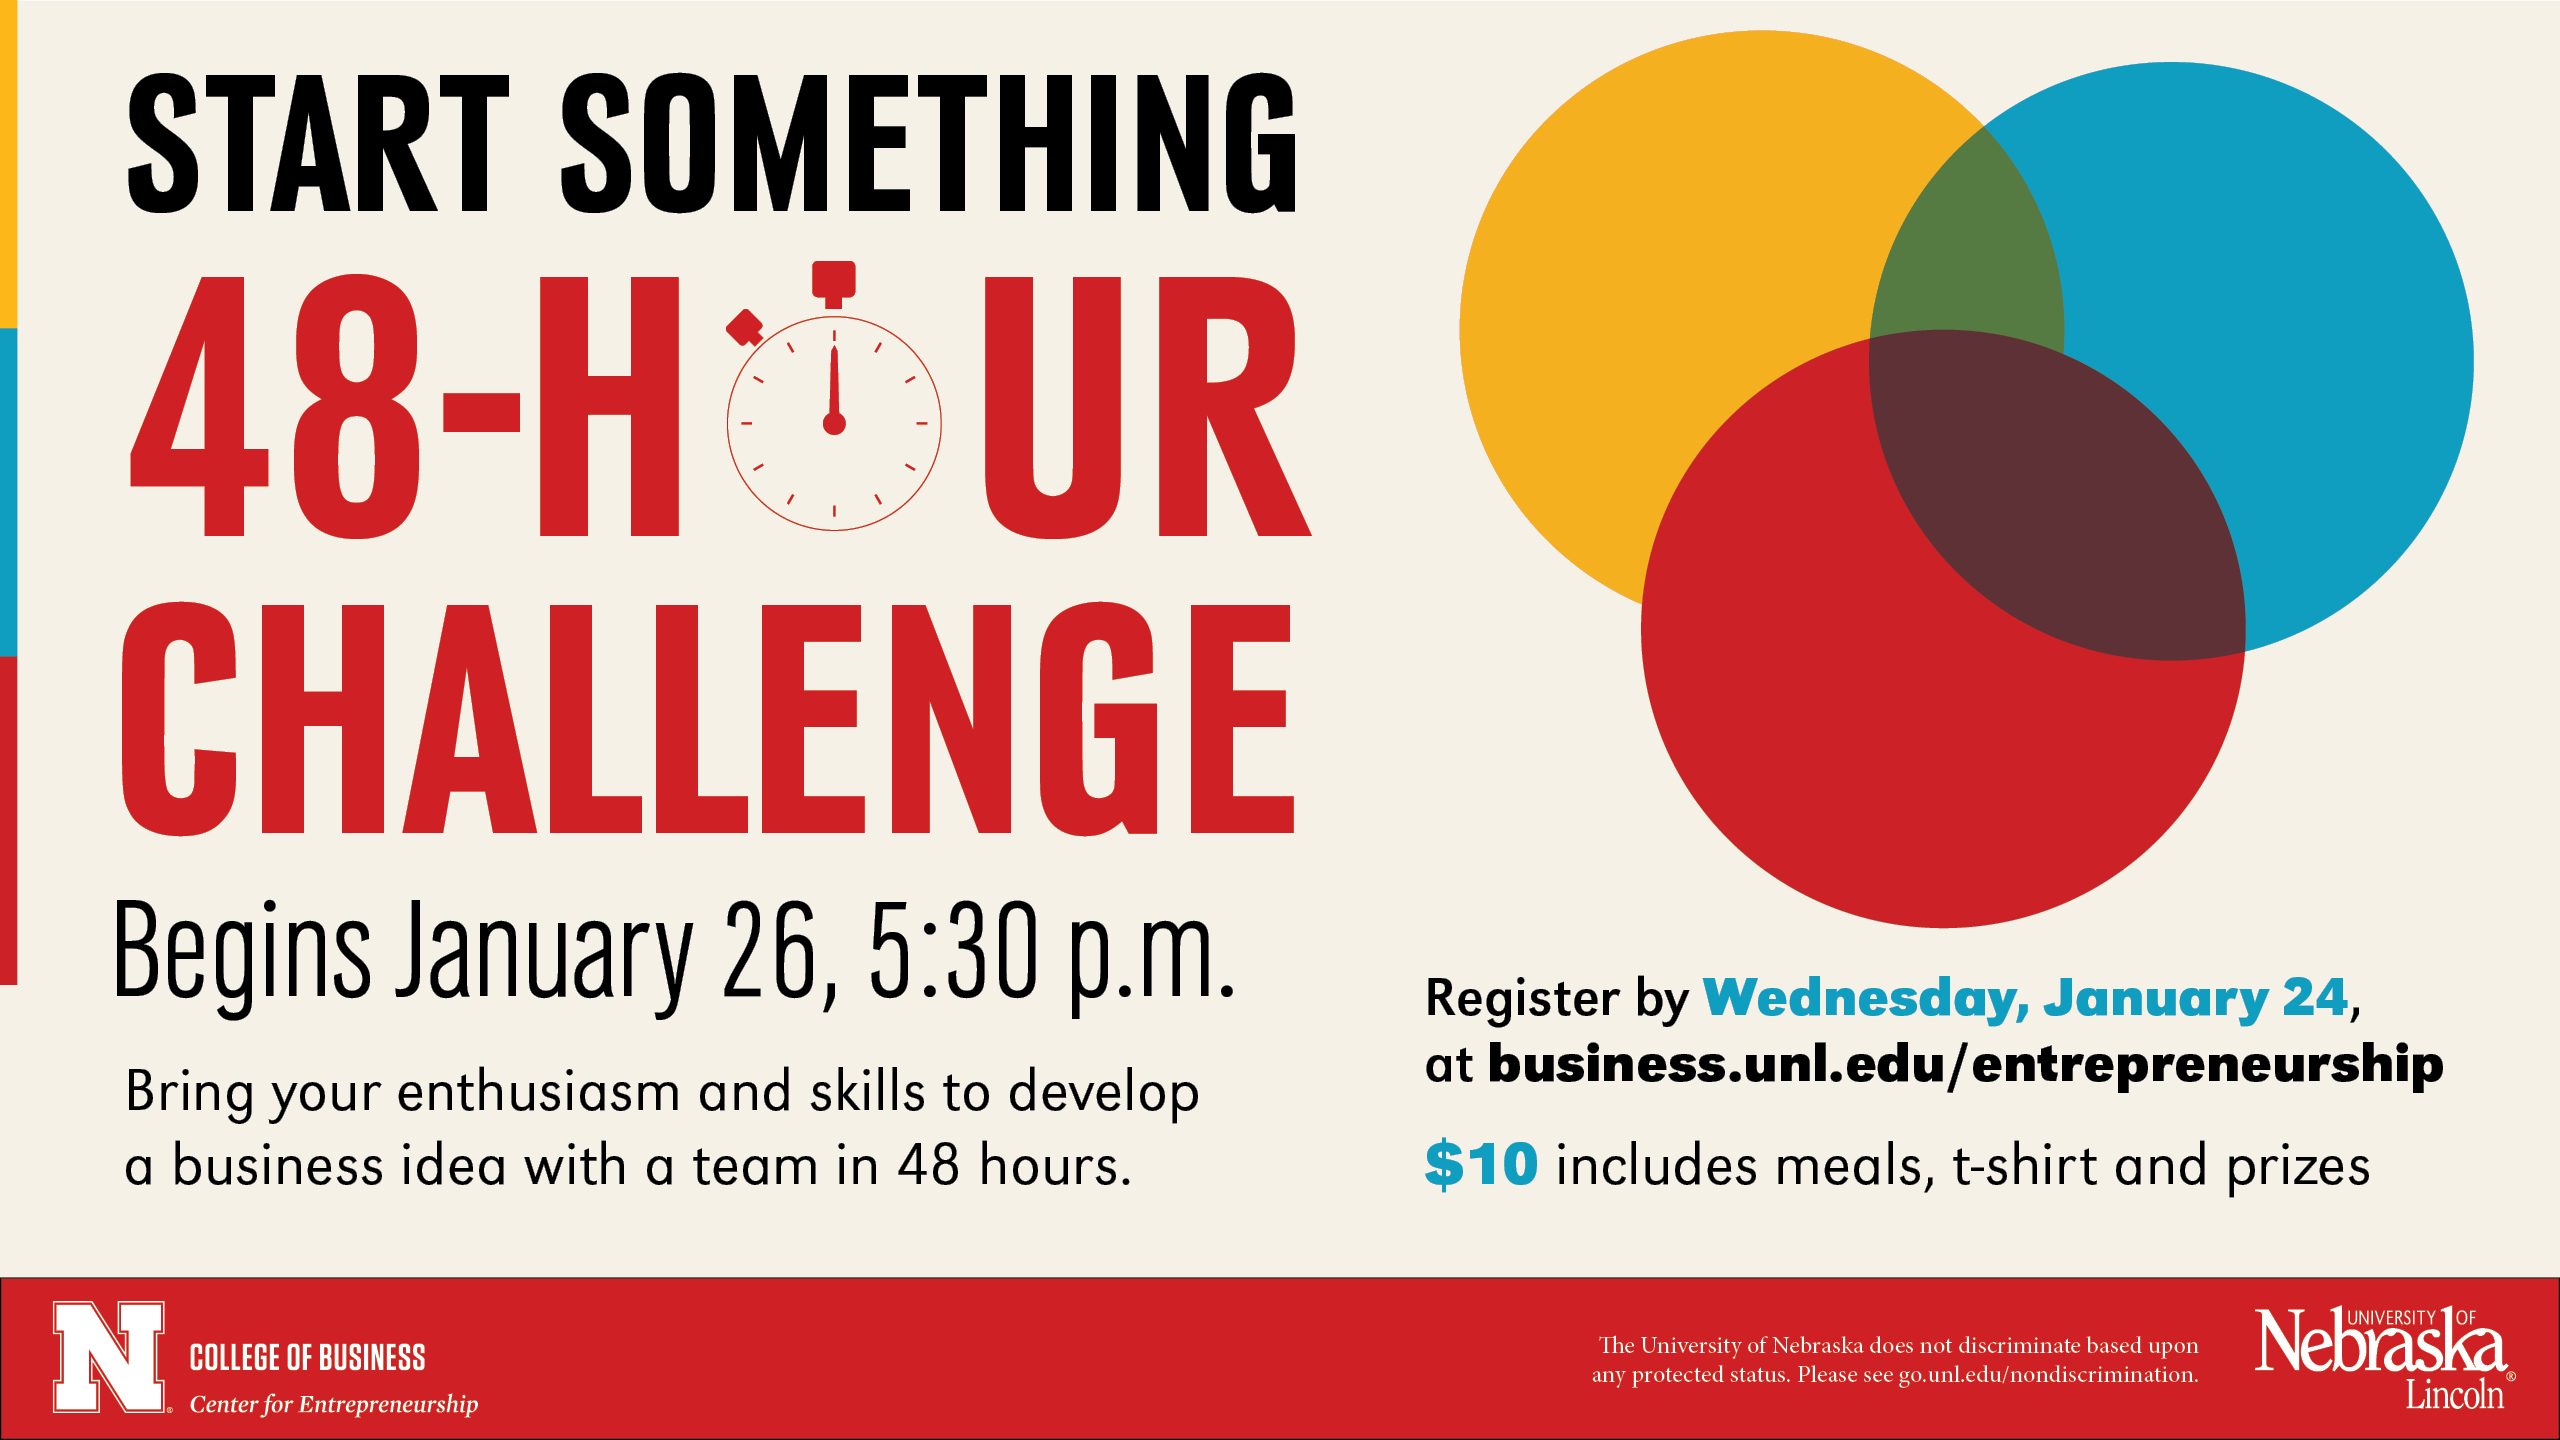 Bring your enthusiasm and skills to the 48-Hour Challenge.